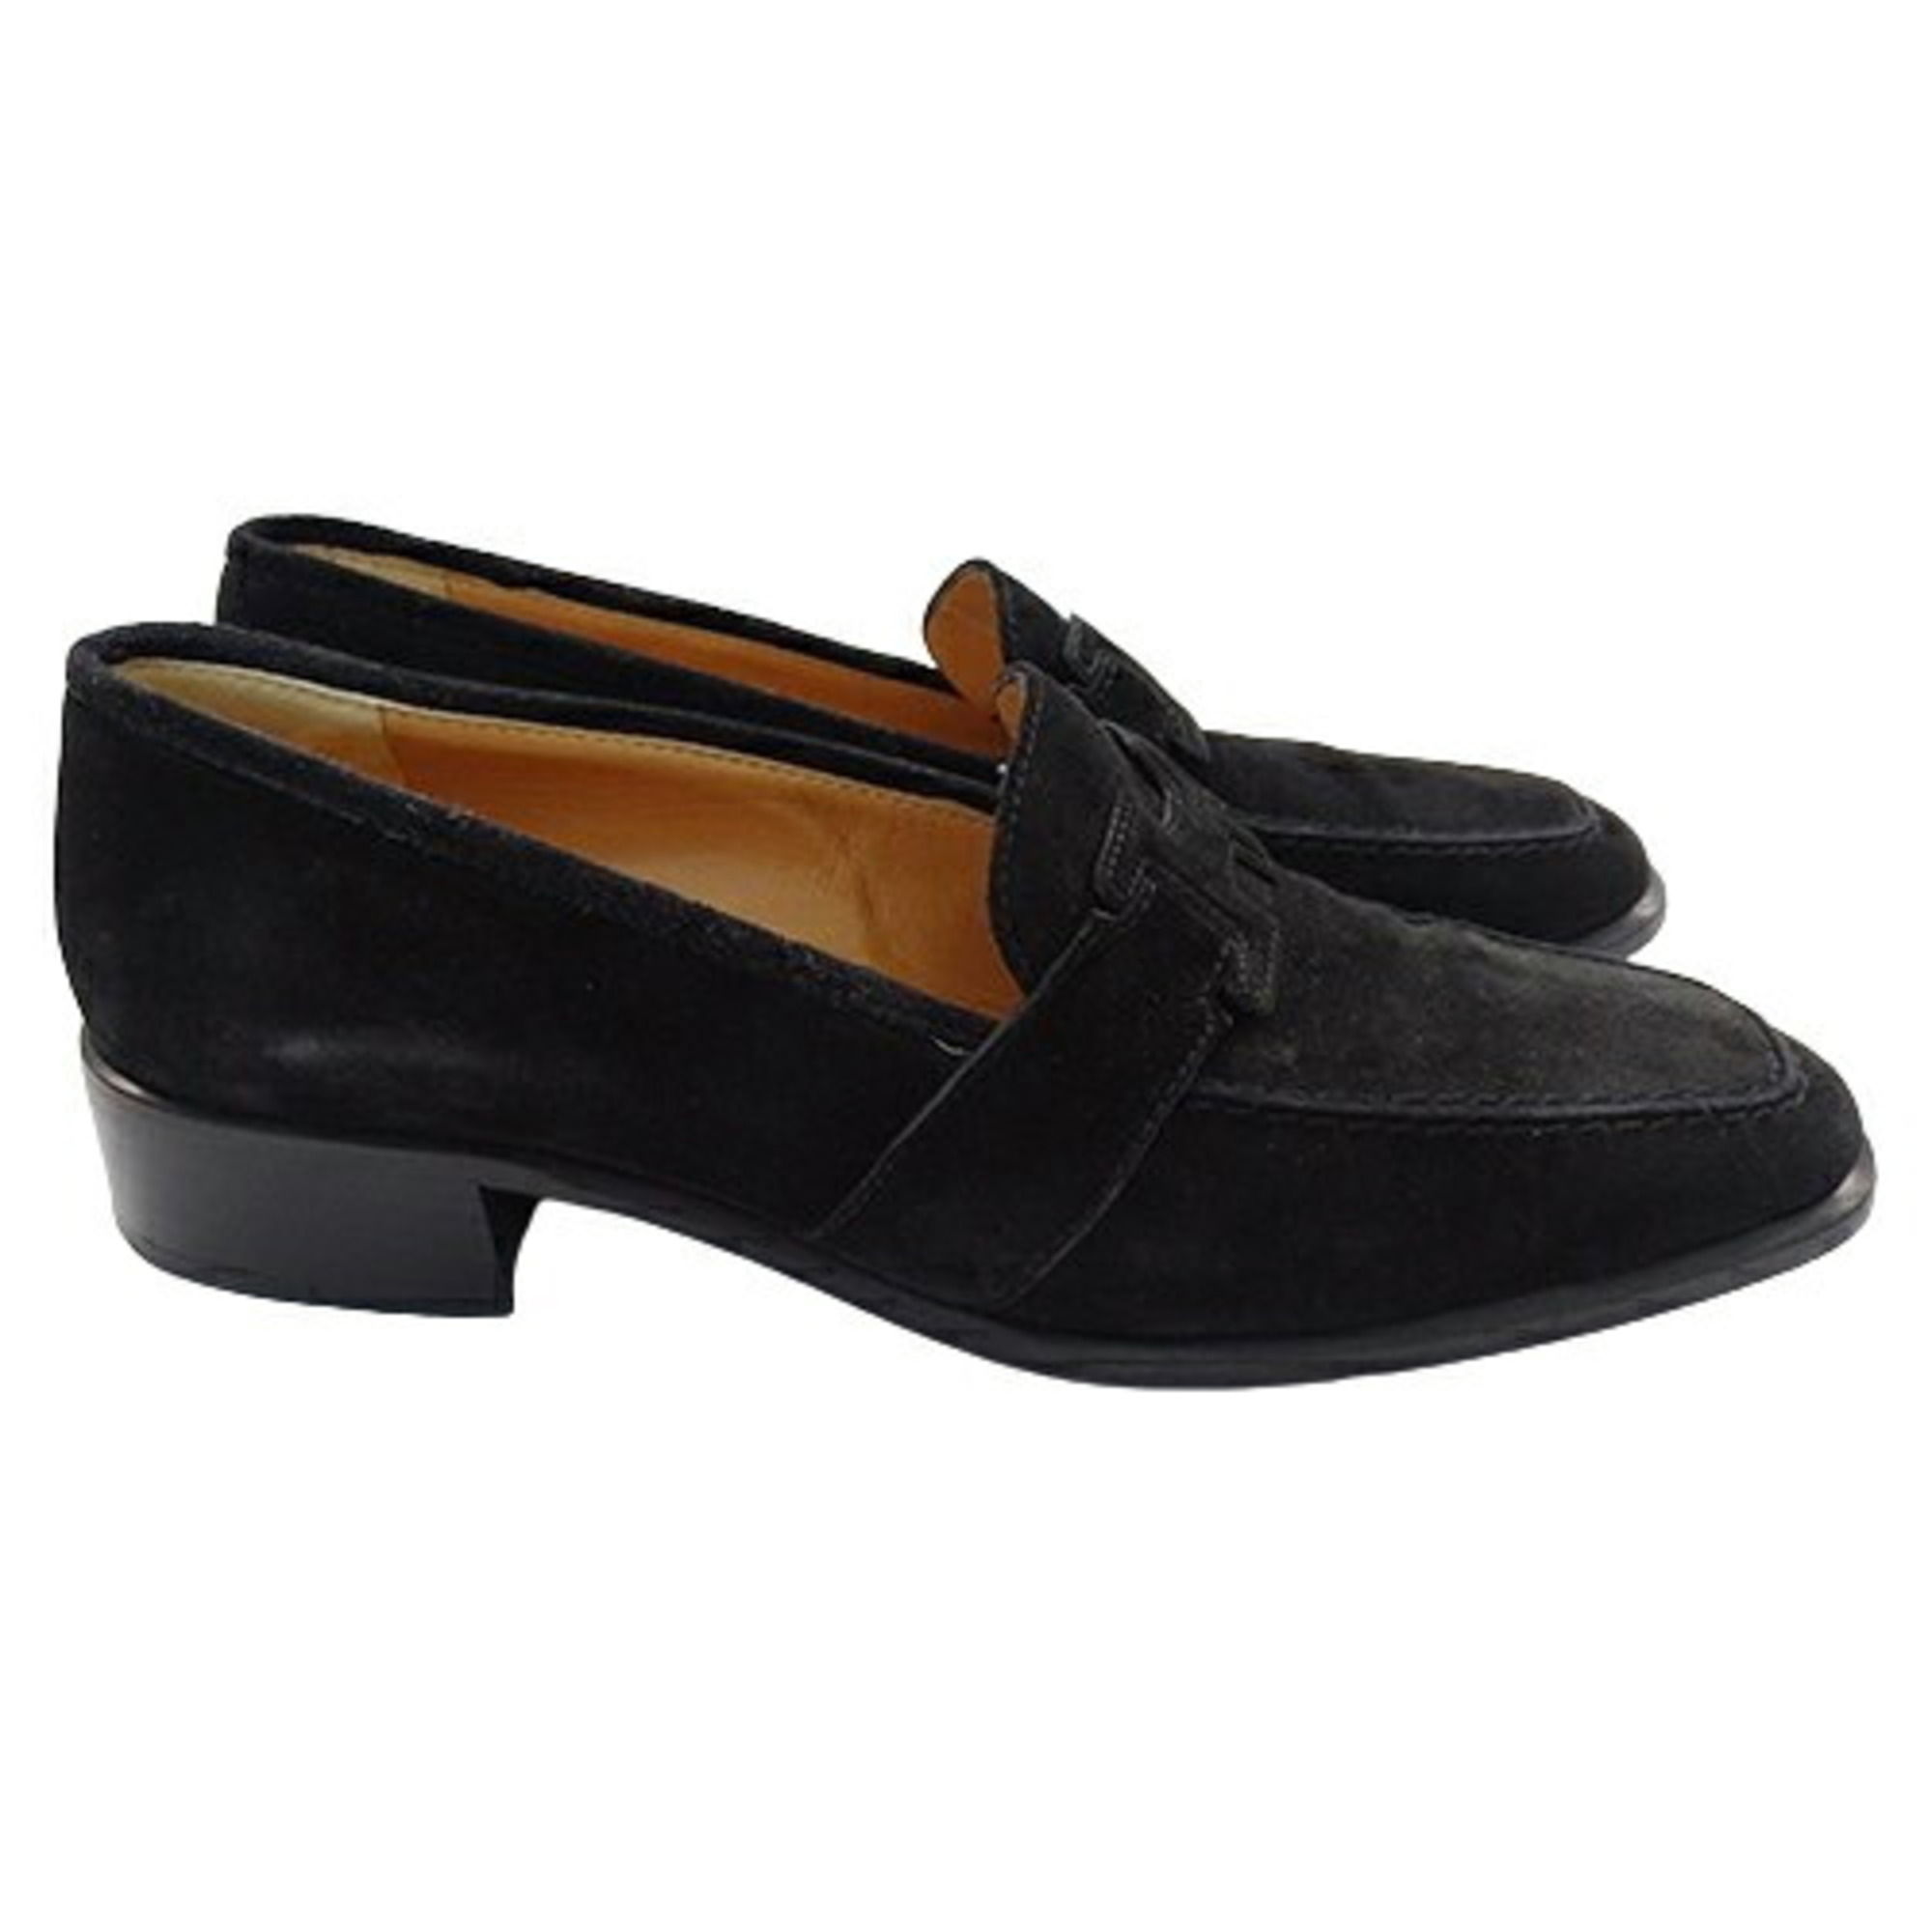 HERMES Shoes Women's Brand Loafer Suede Black #36 Approx. 23cm H Logo